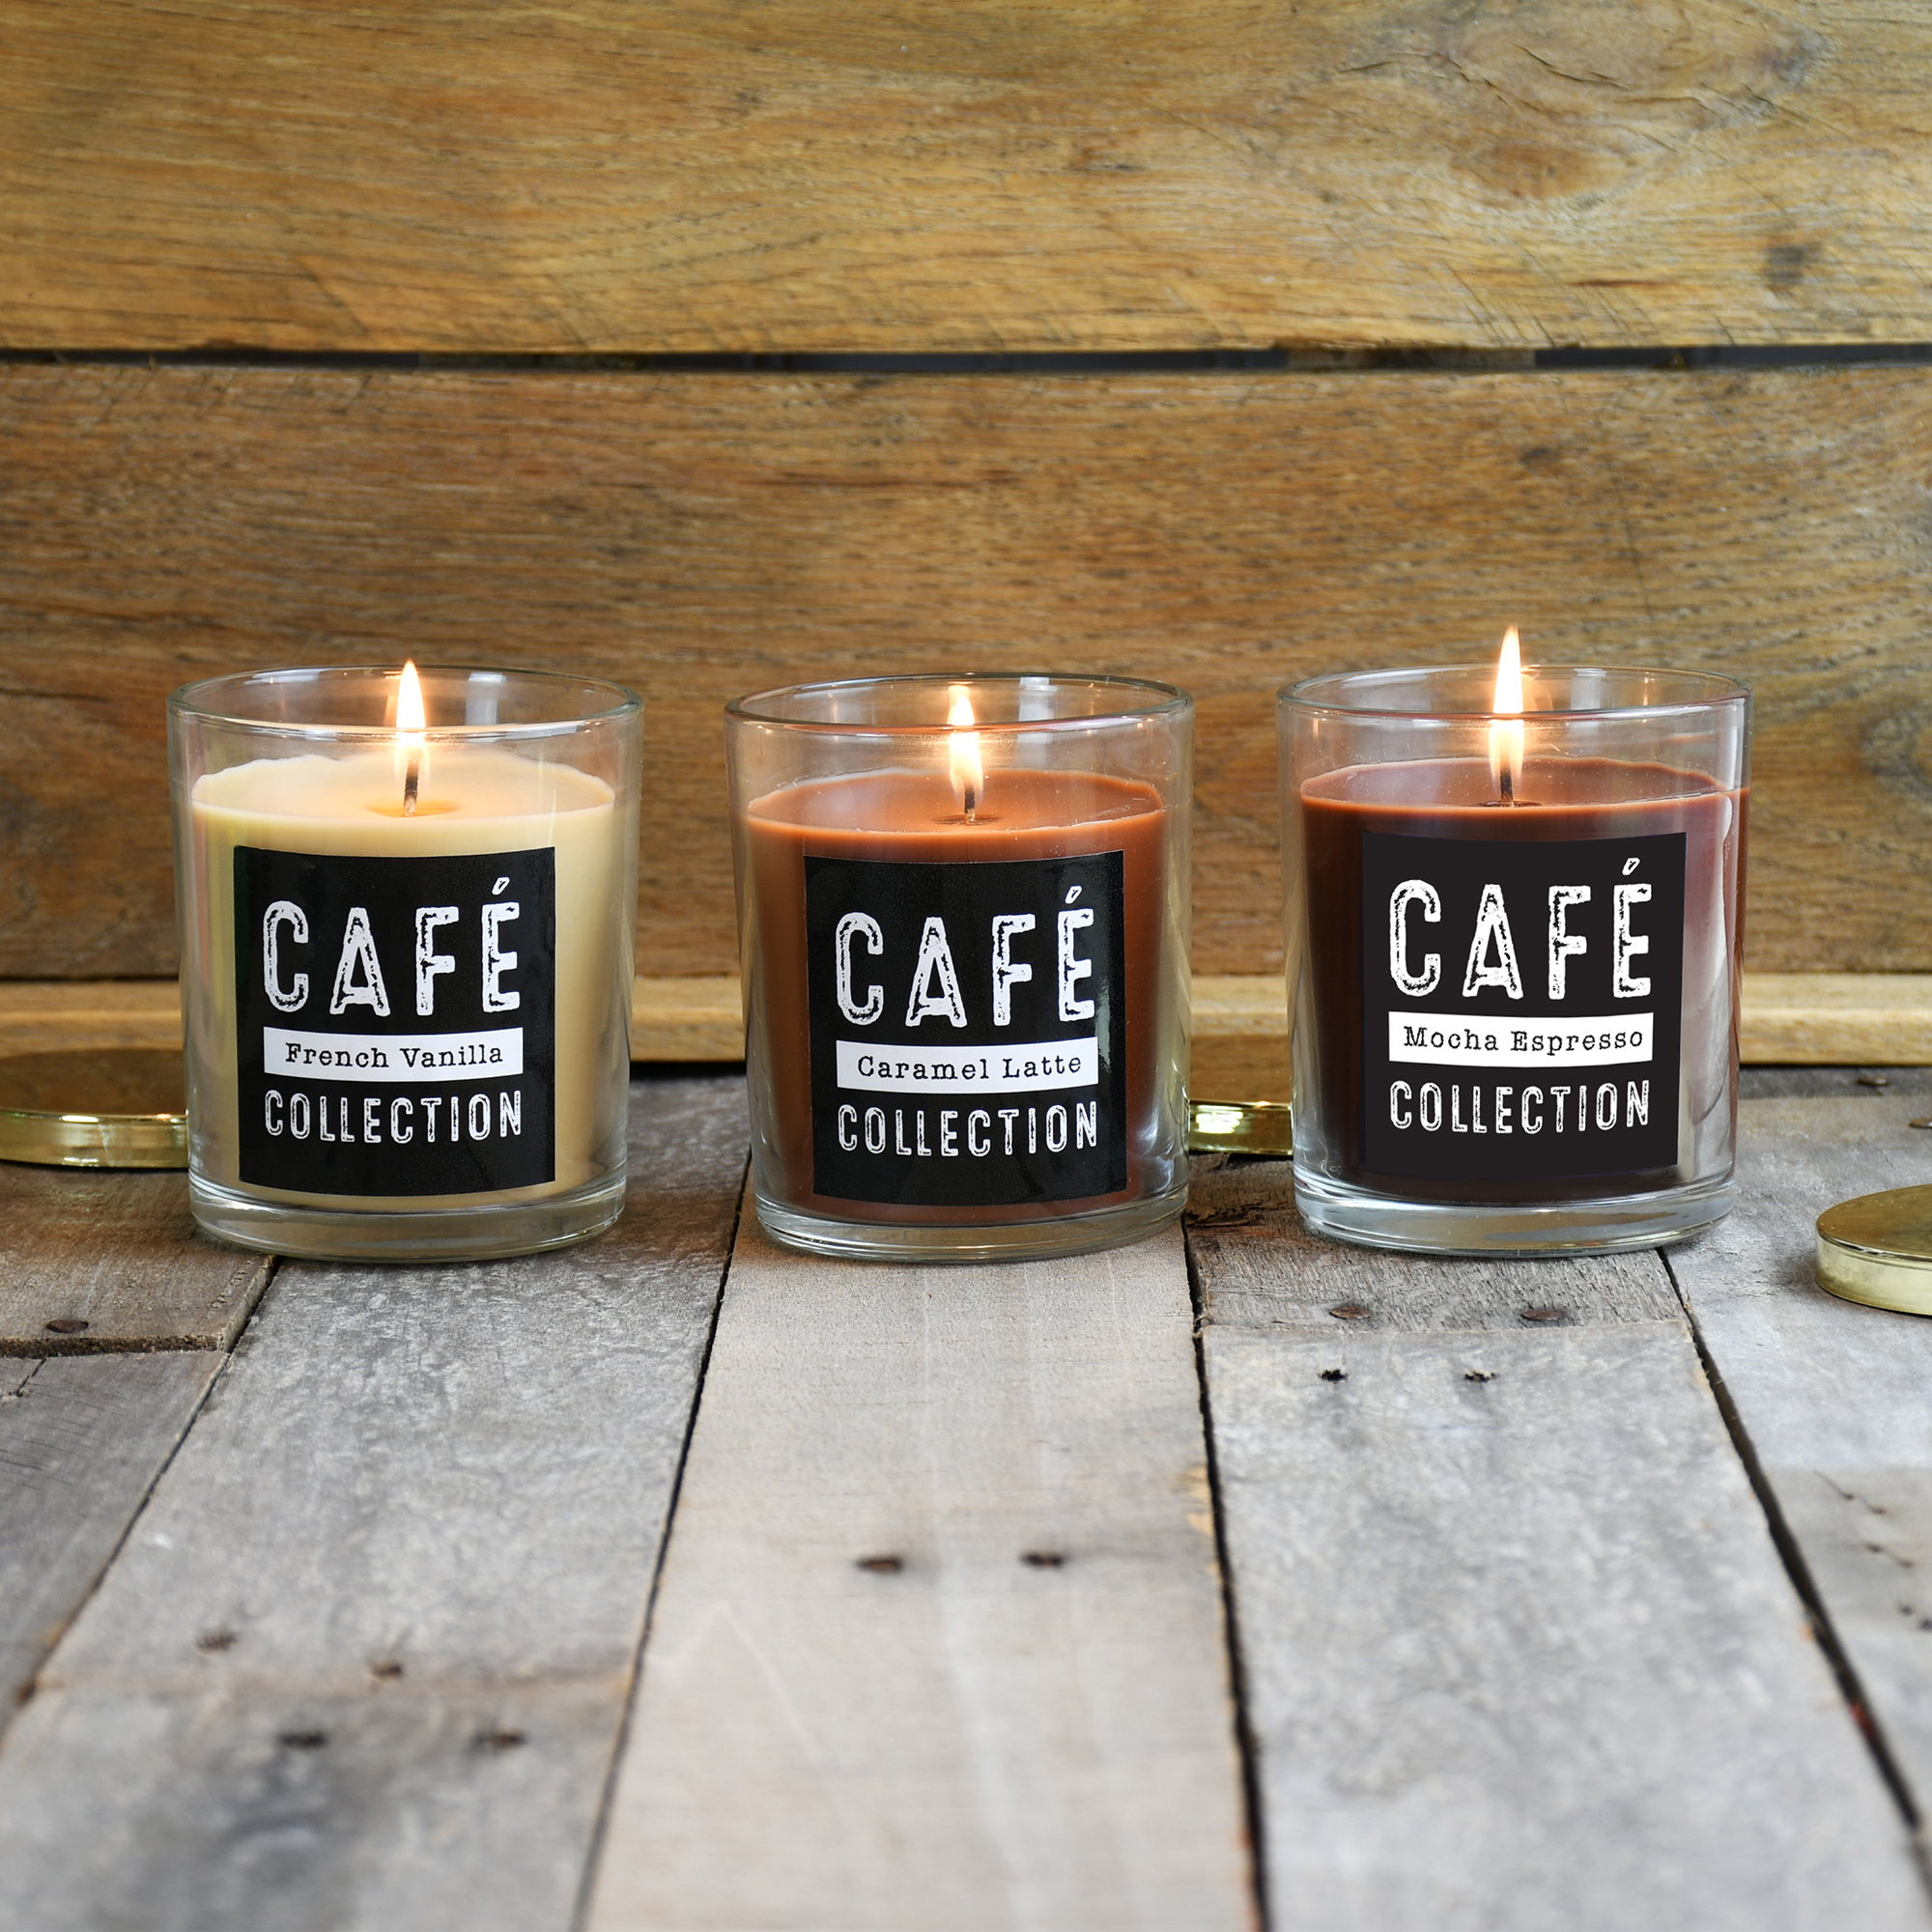 Coffee scented candles from the Café Collection. French vanilla, caramel latte, and mocha espresso.